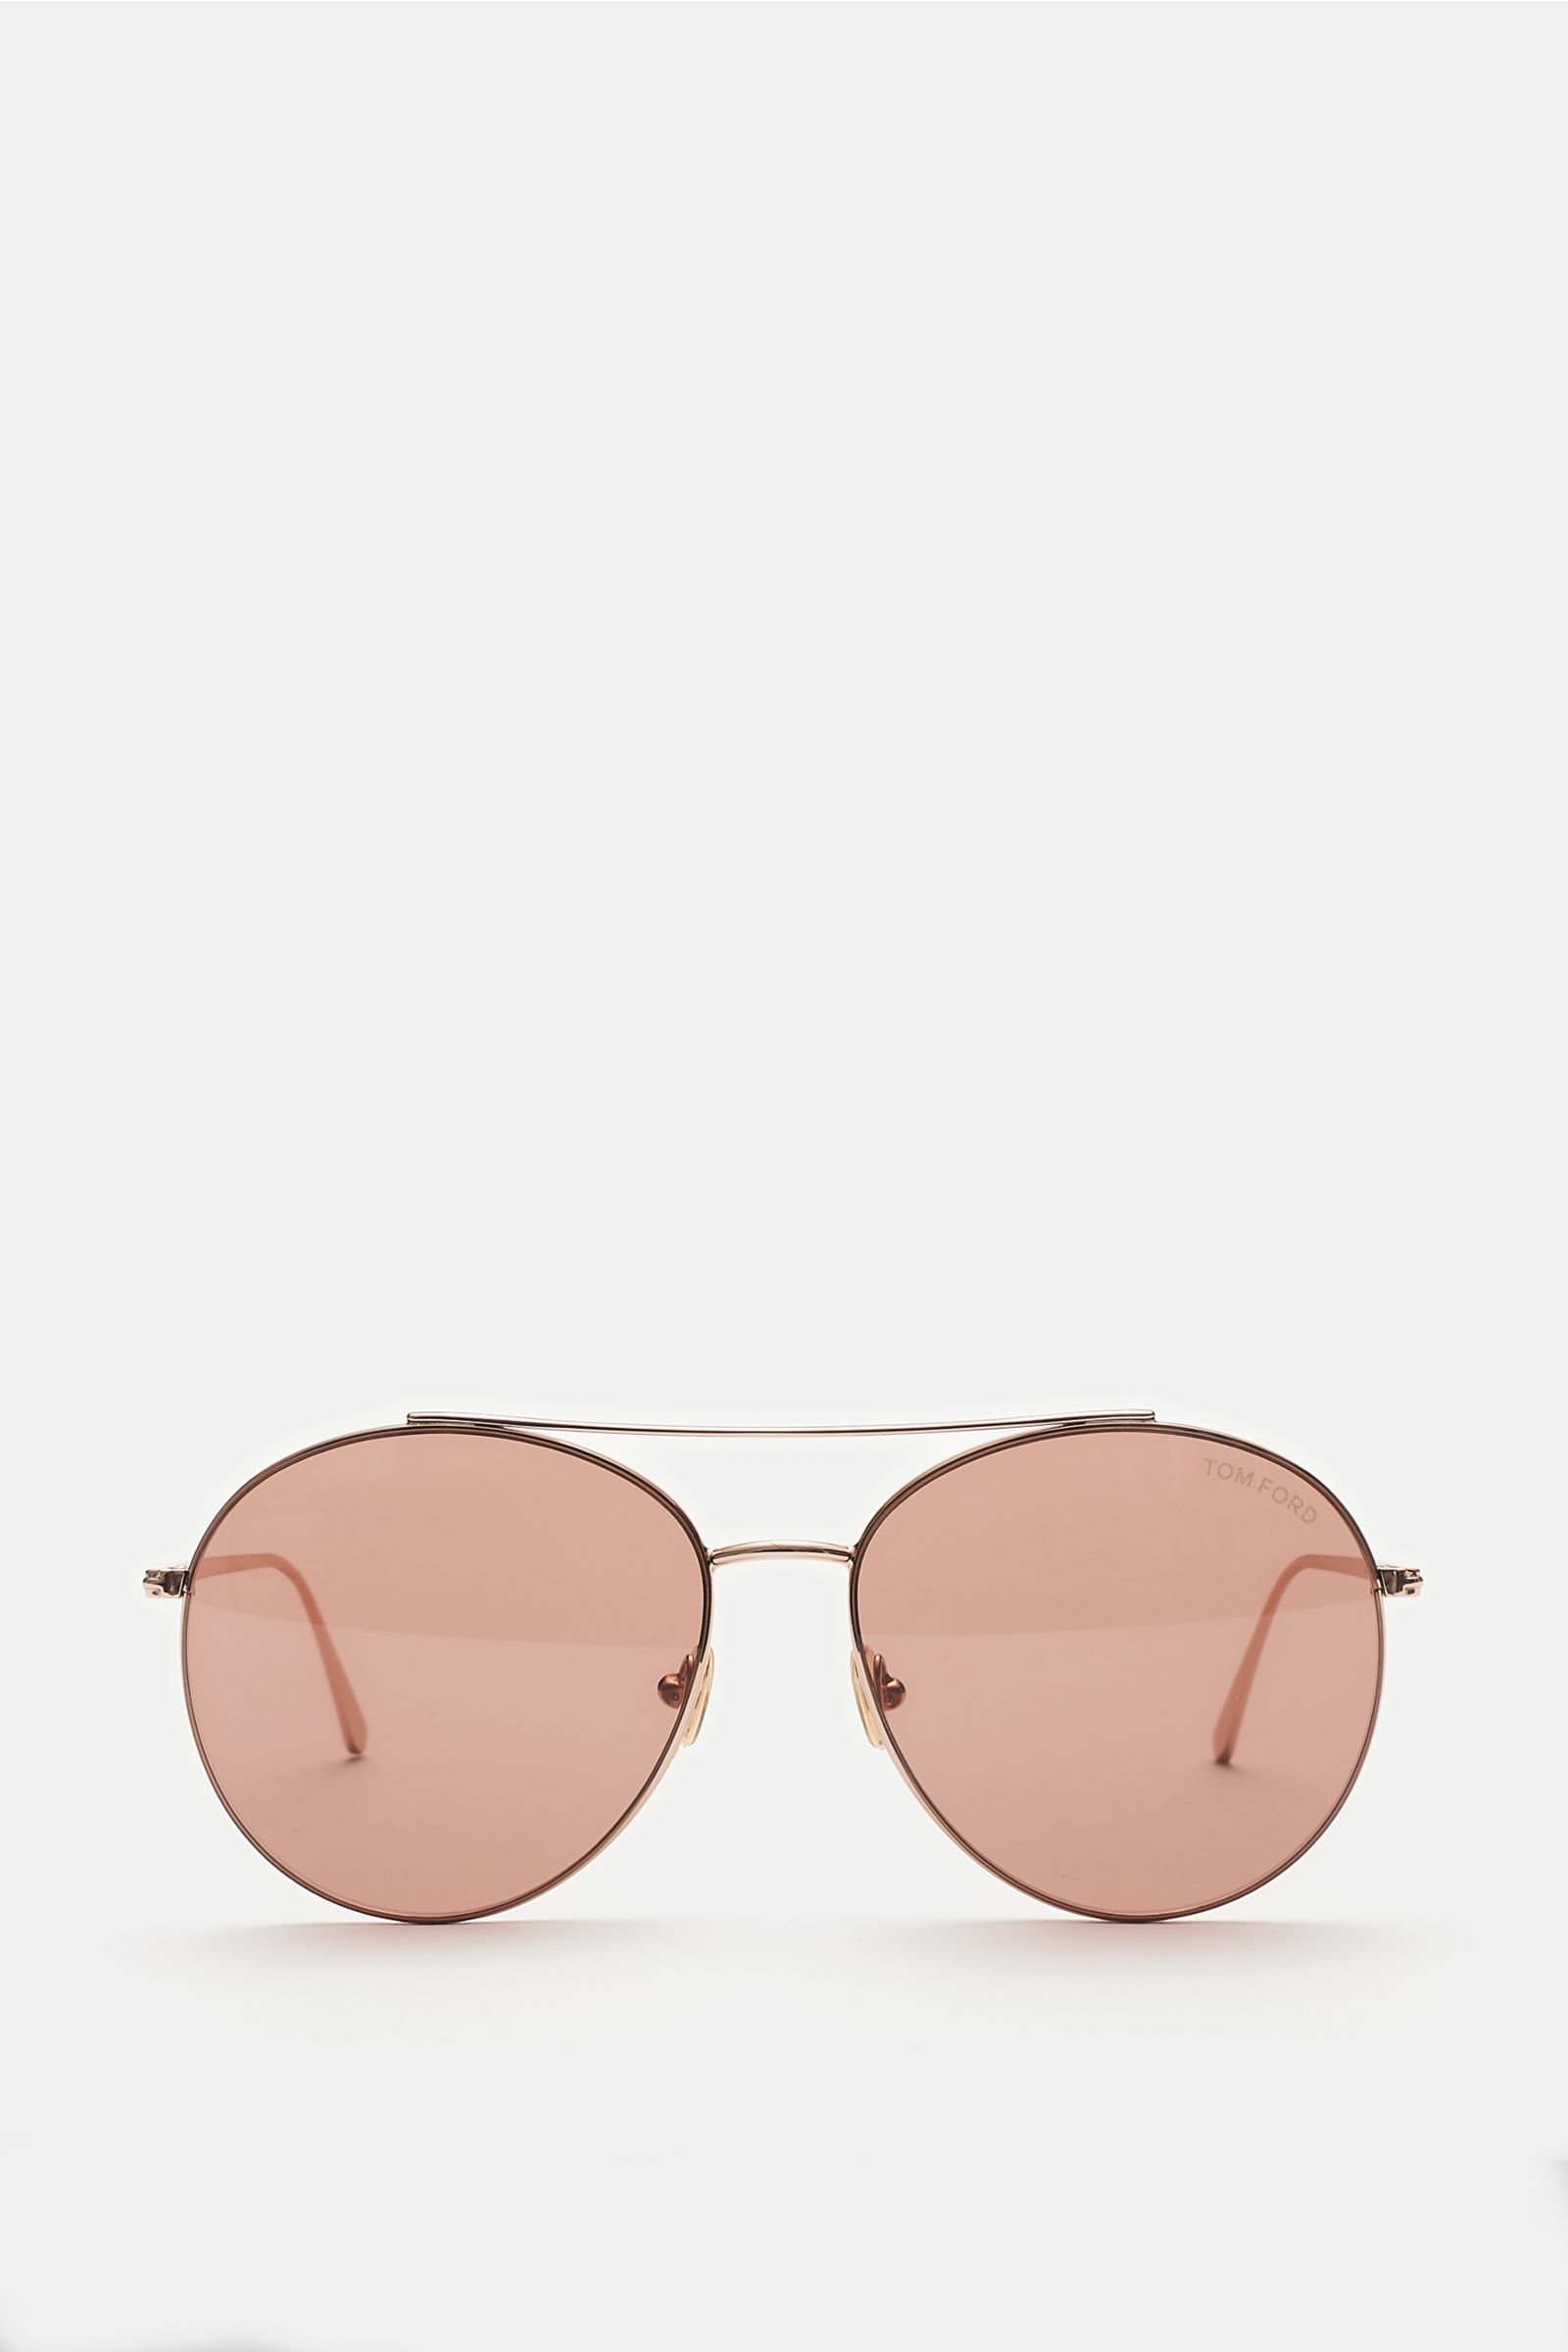 Sunglasses 'Cleo' rose gold/brown